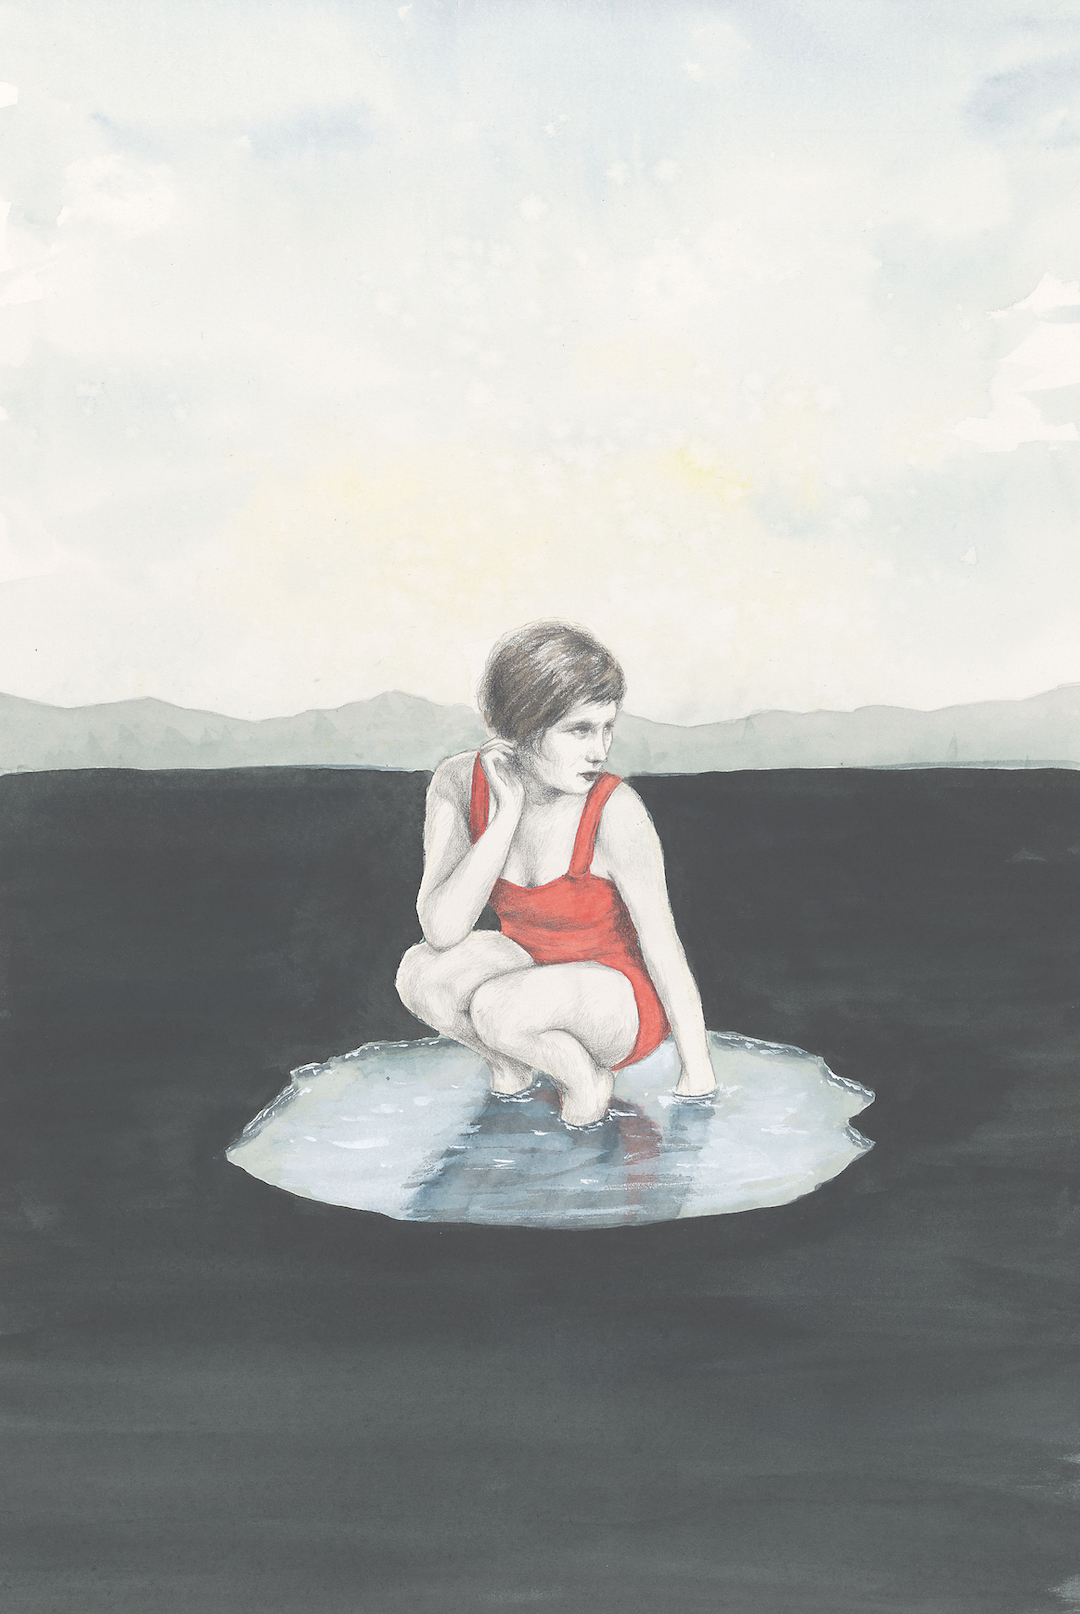 Rachel Goodyear, Bathing, 2018, pencil and watercolour on paper, 49.5 × 33 cm (19 ½ × 12 ⅞